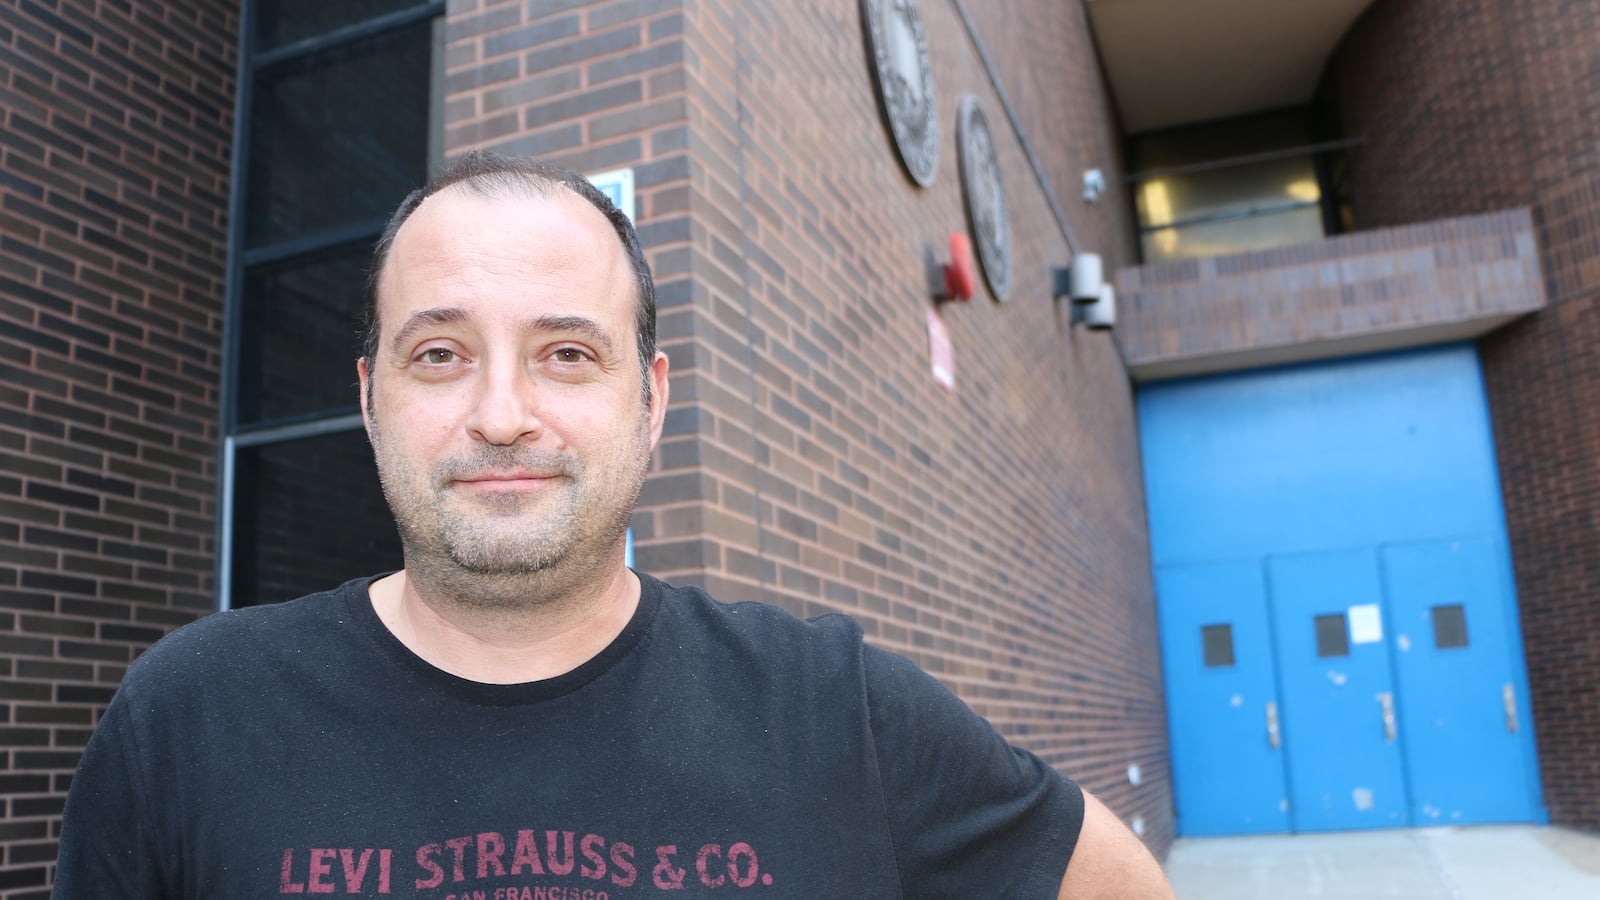 Aristotle Galanis has taught physical education and health at Murry Bergtraum High School for Business Careers for the last decade.